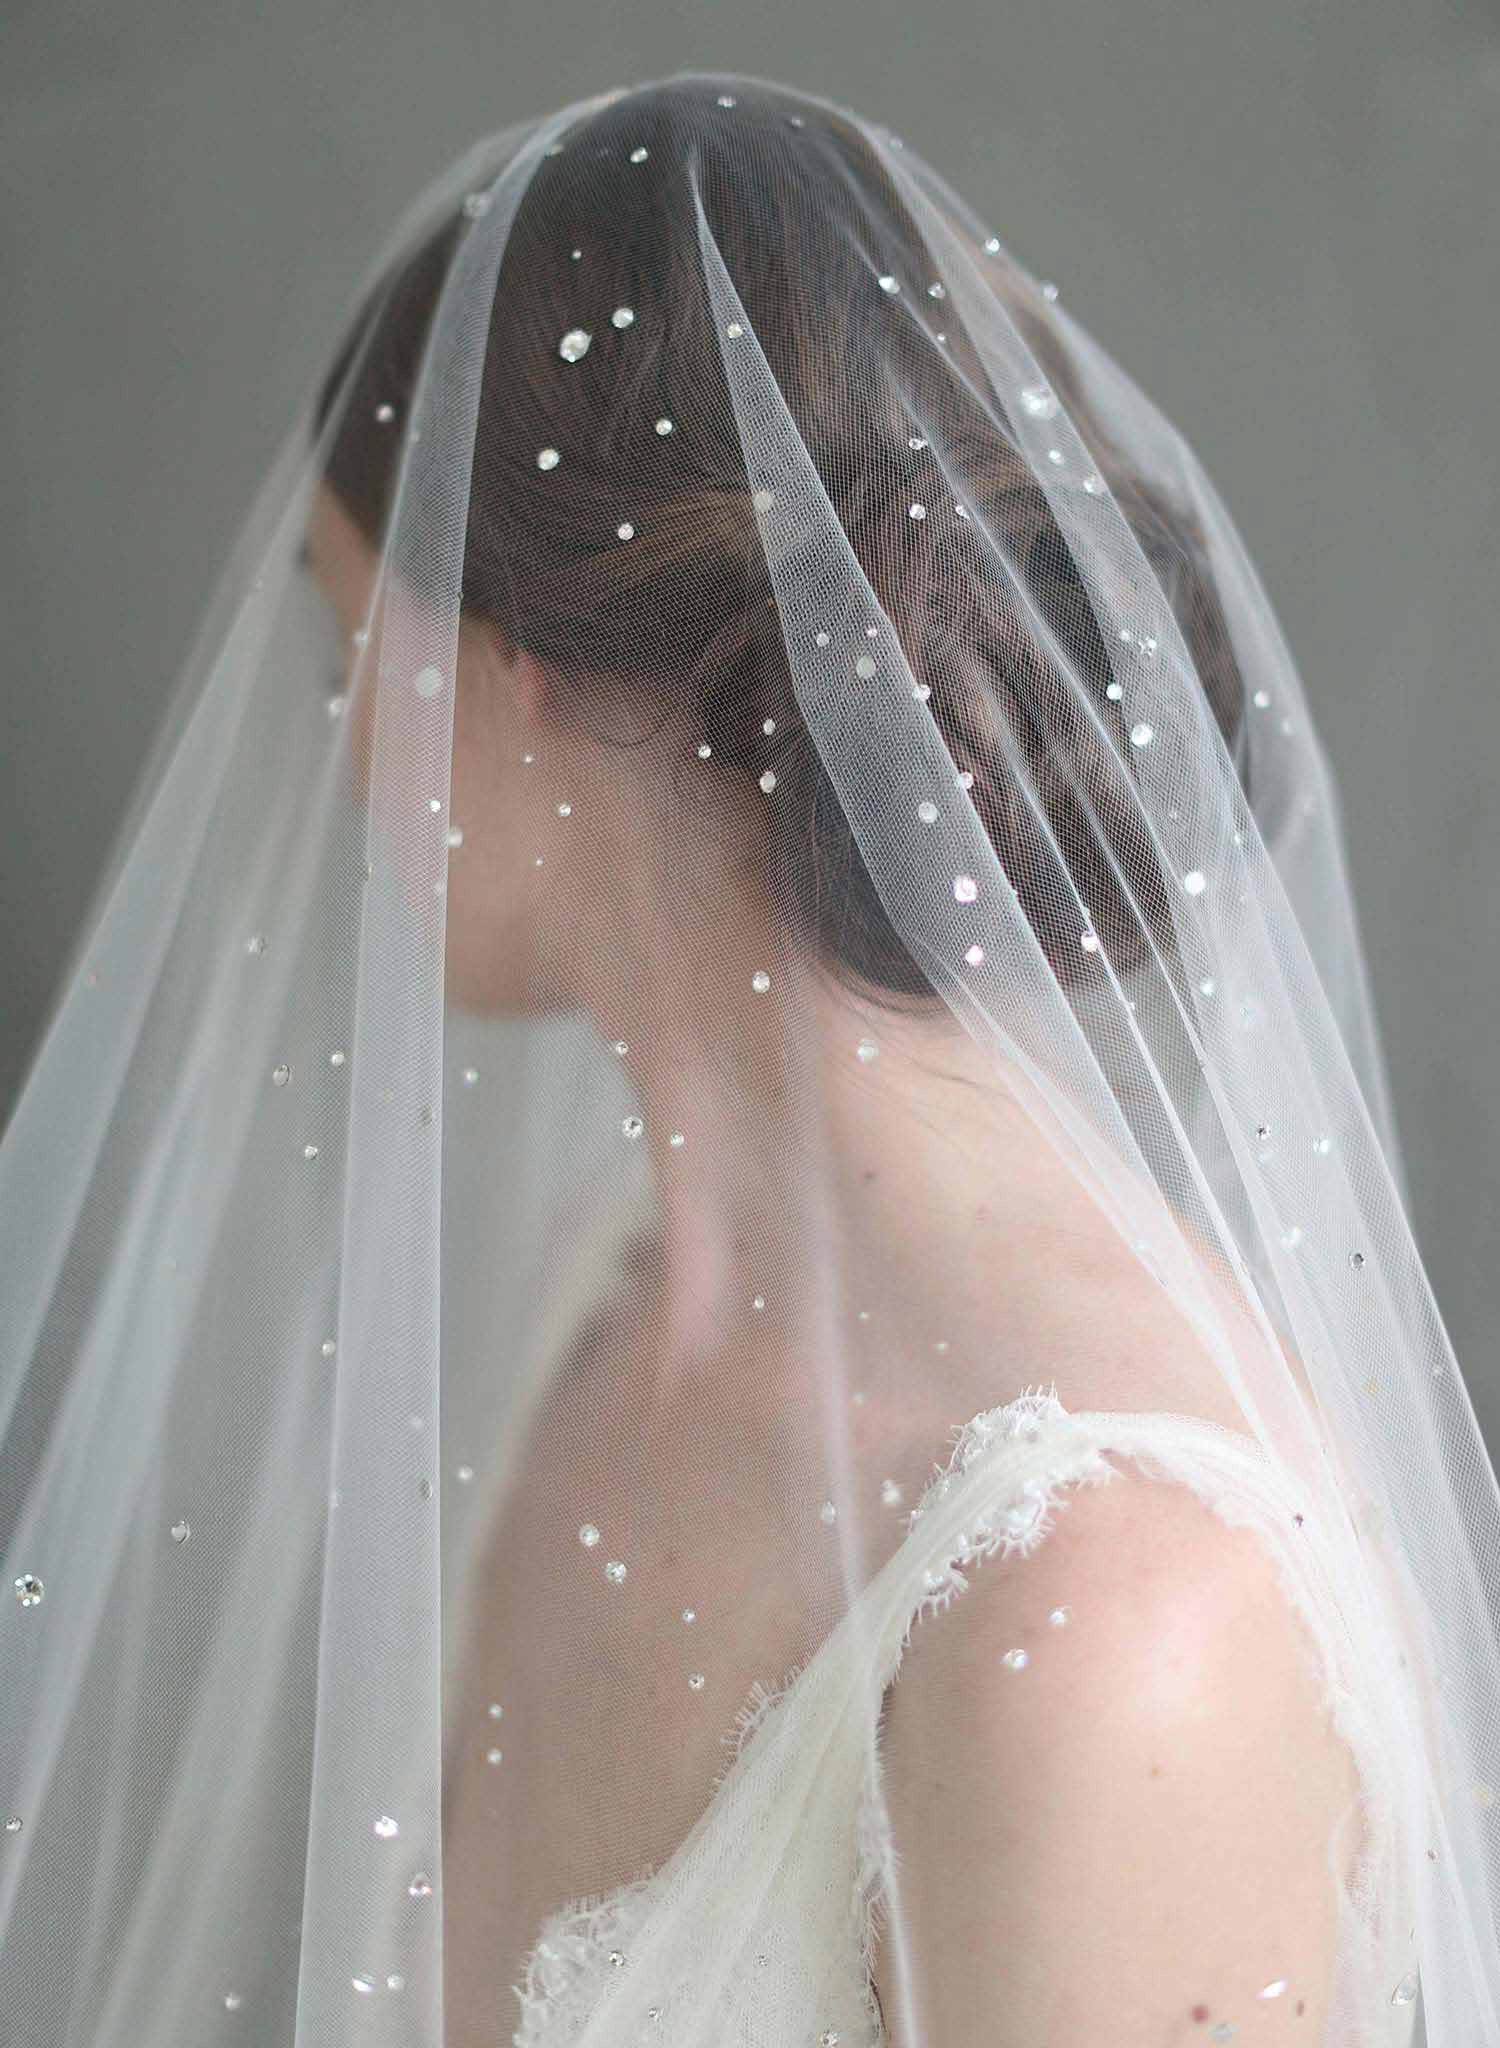 Twigs & Honey Scattered Rhinestone Bridal Veil - Scattered Stardust Veil - Style #967 Ivory / Chapel (90)